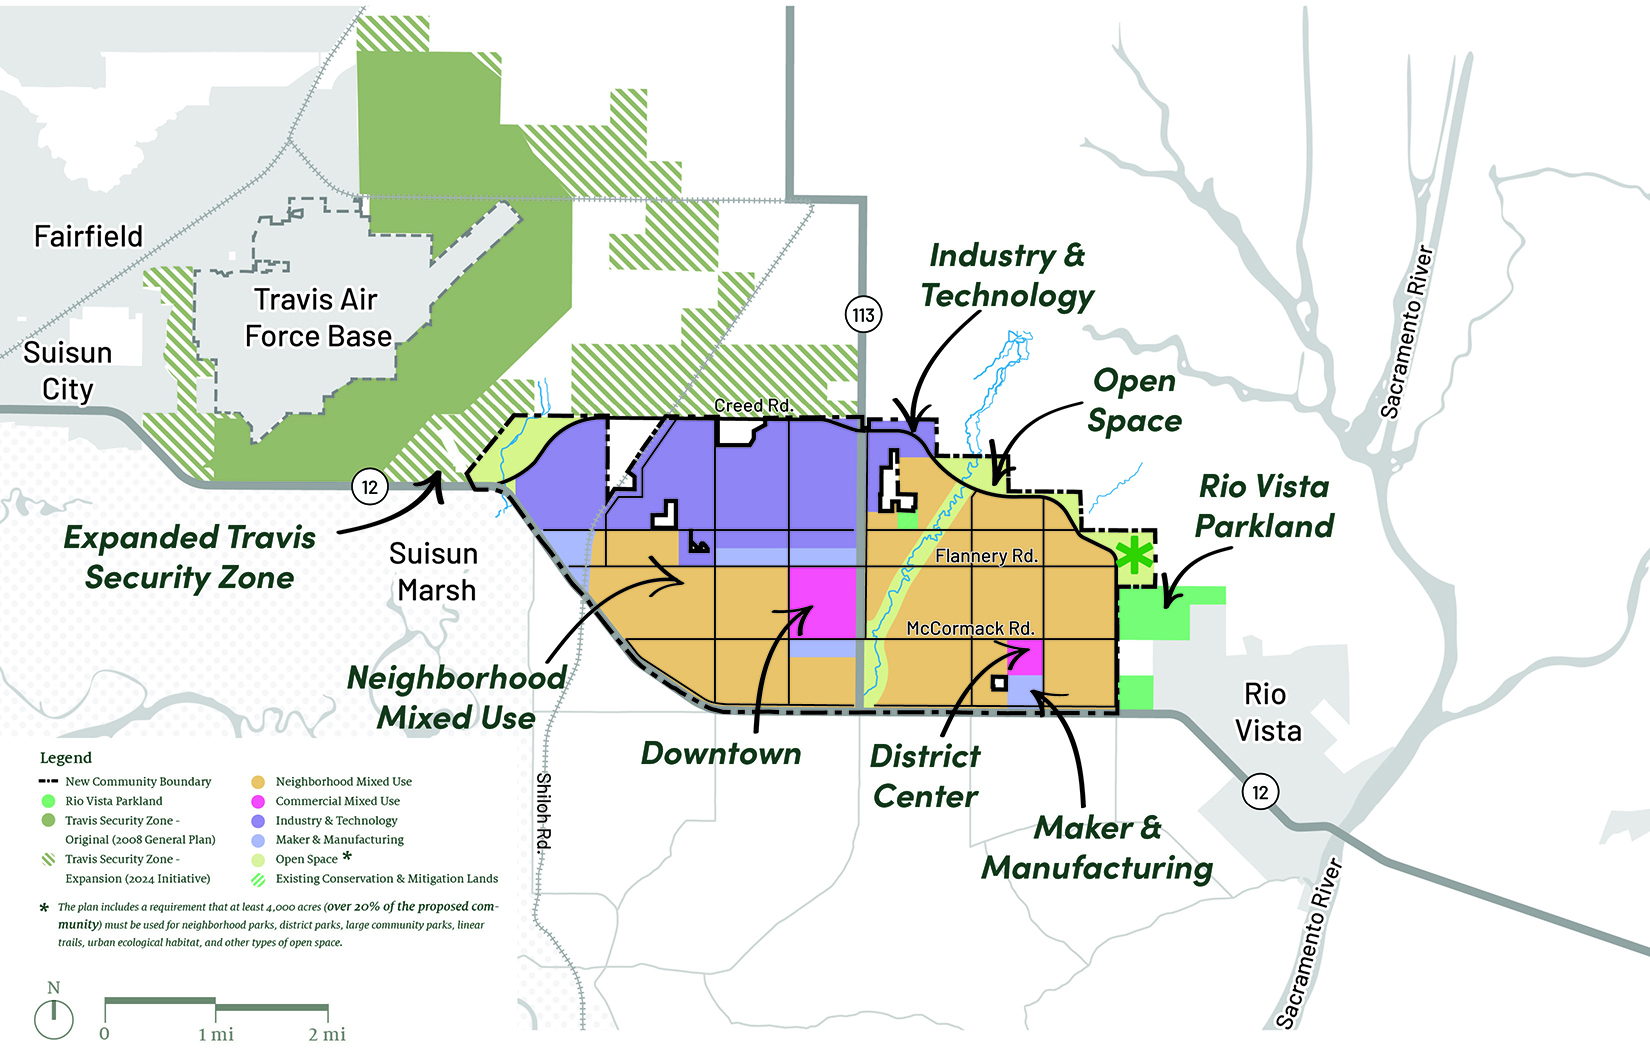 A color-coded map displaying different zones for a community near Travis Air Force Base, with keys for land uses and features.